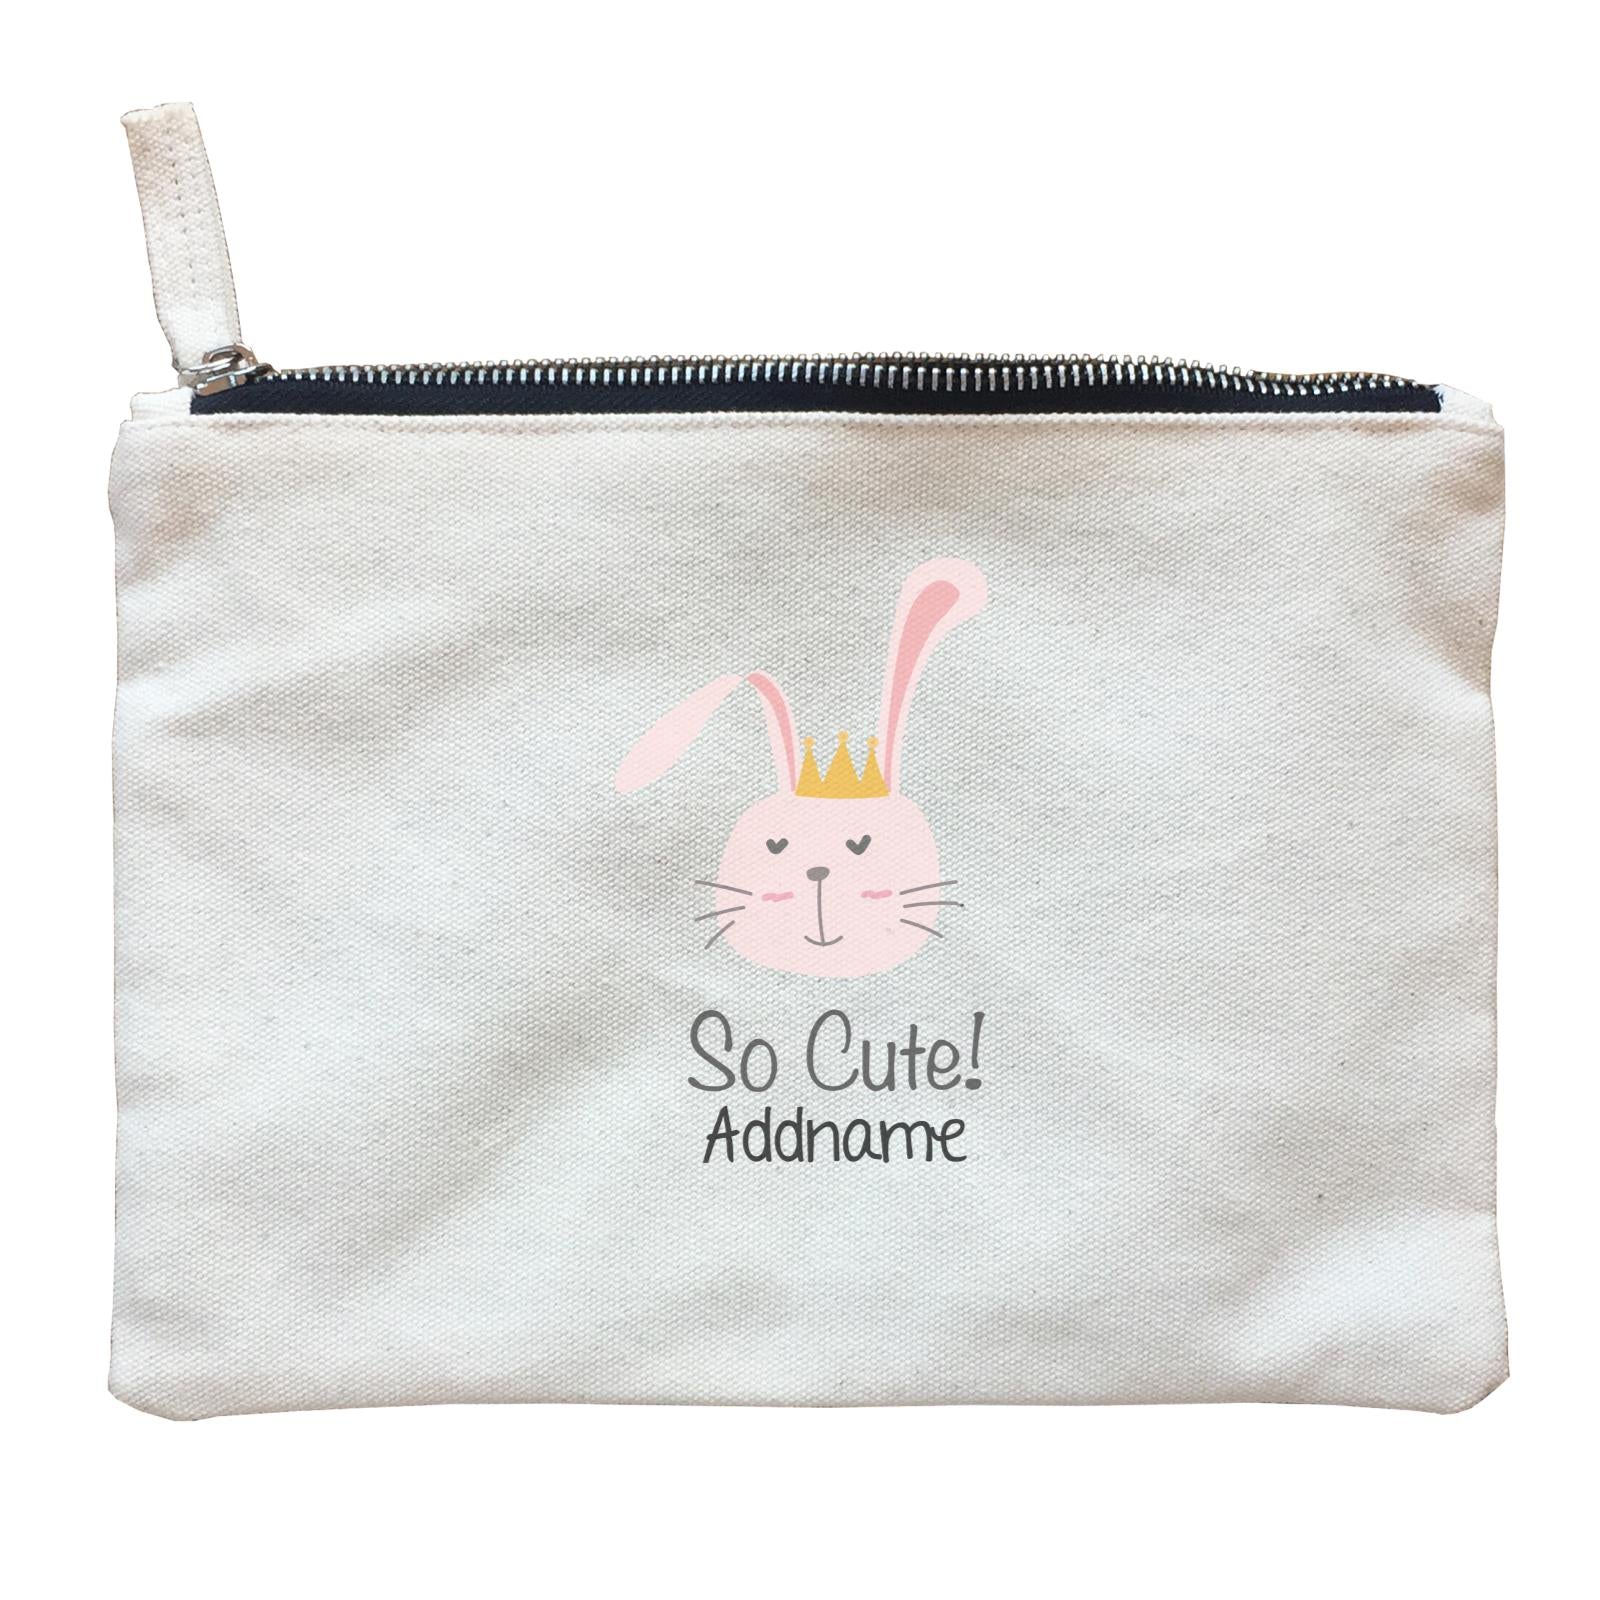 Cute Animals And Friends Series Cute Love Bunny With Crown Addname Zipper Pouch